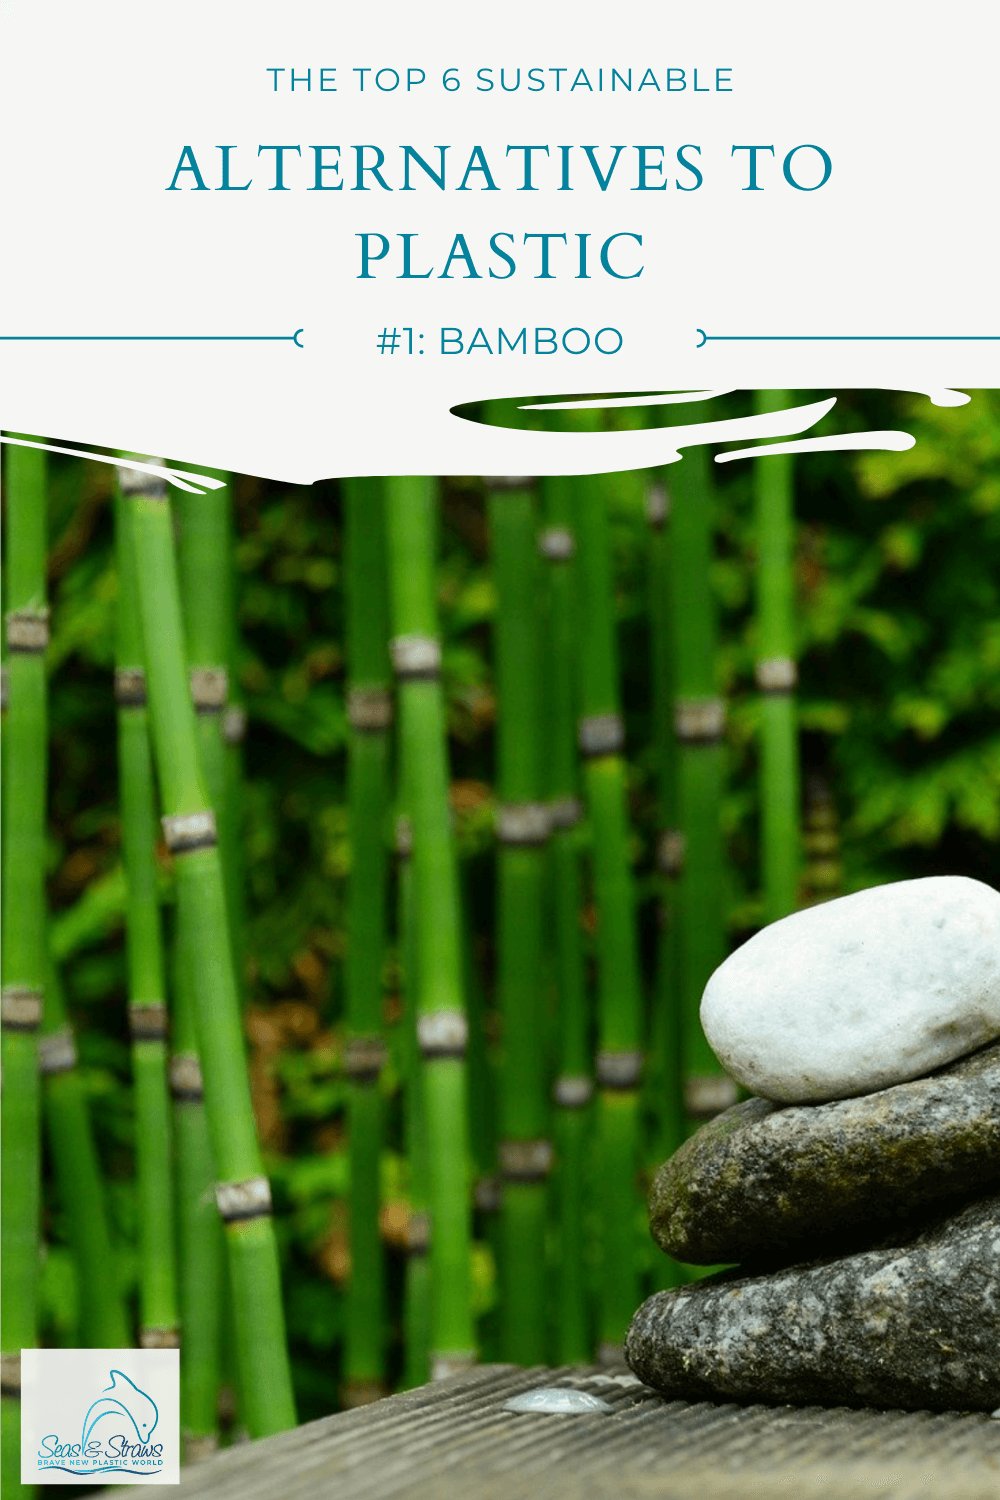 Bamboo is quickly becoming the new superplant in the fight to create a cleaner, more sustainable future.